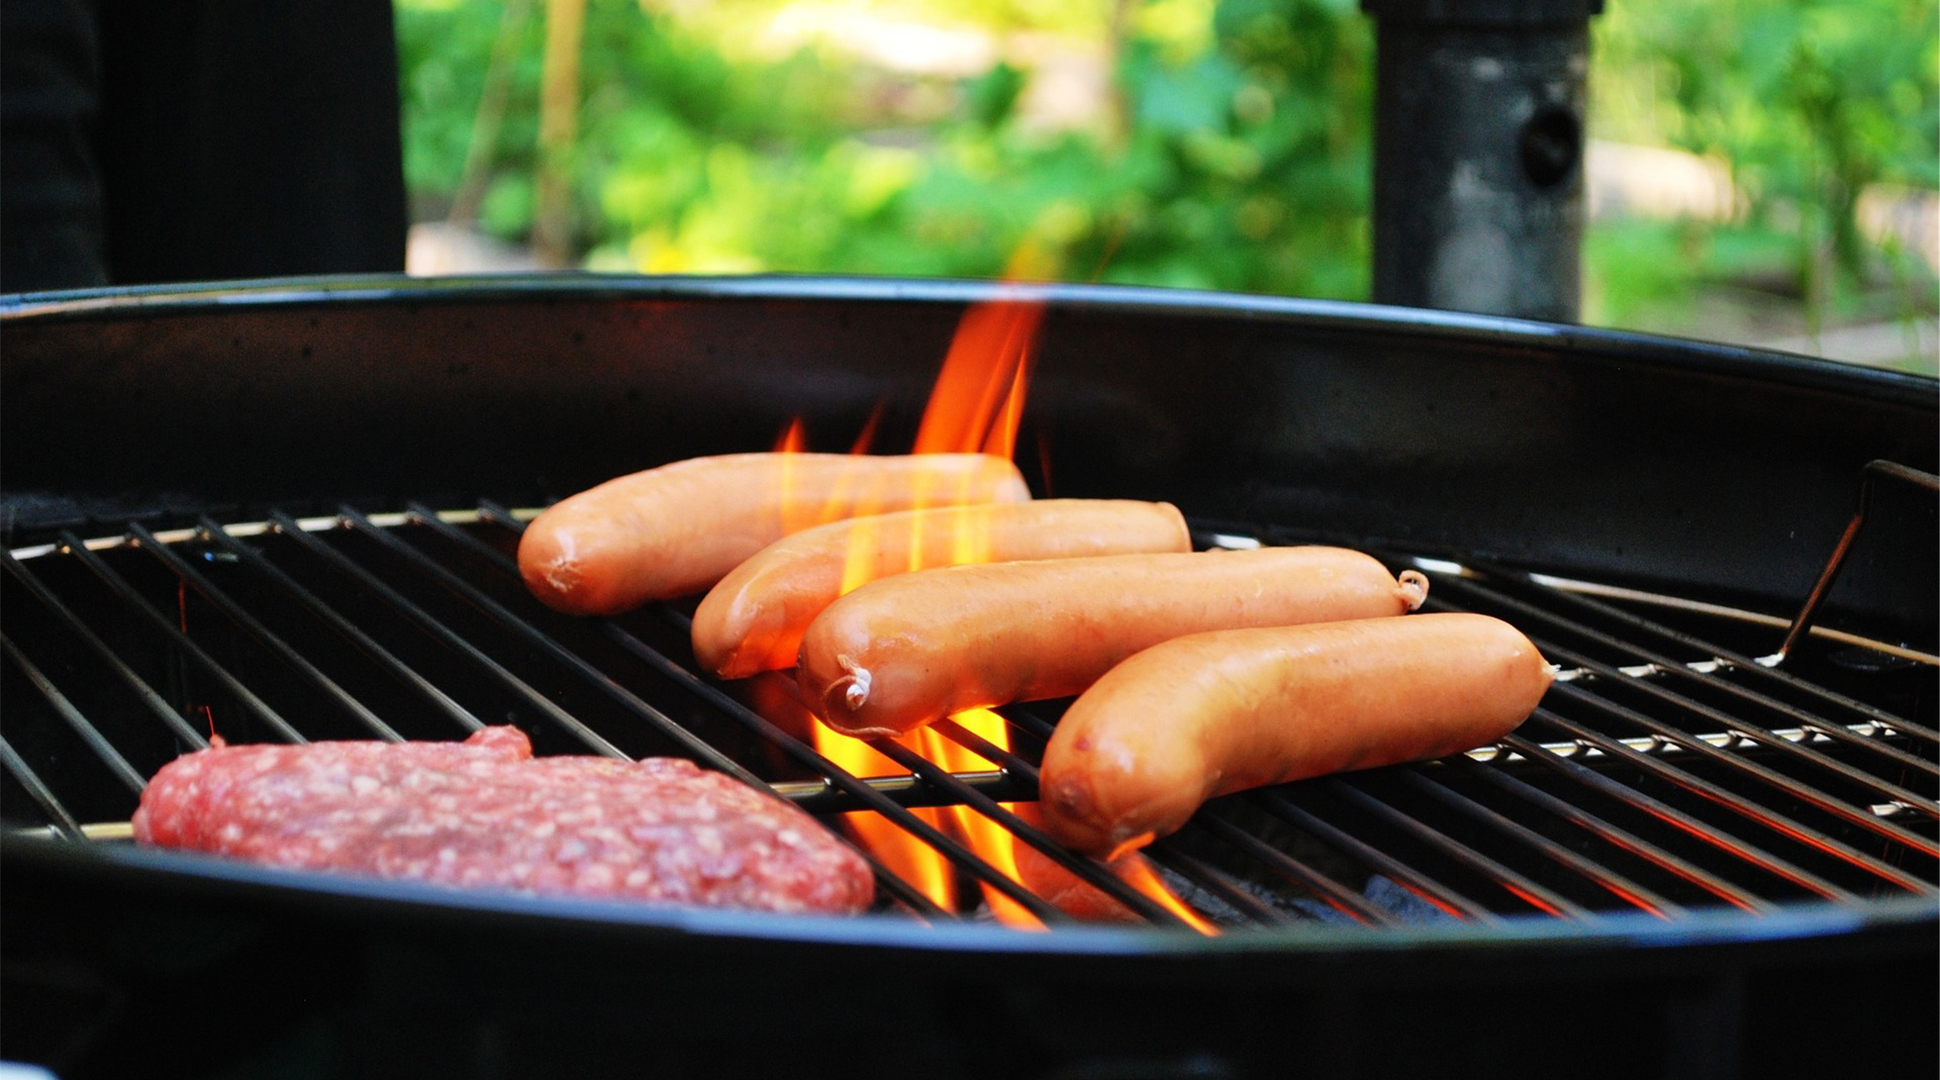 Your July 4th cookout remains affordable